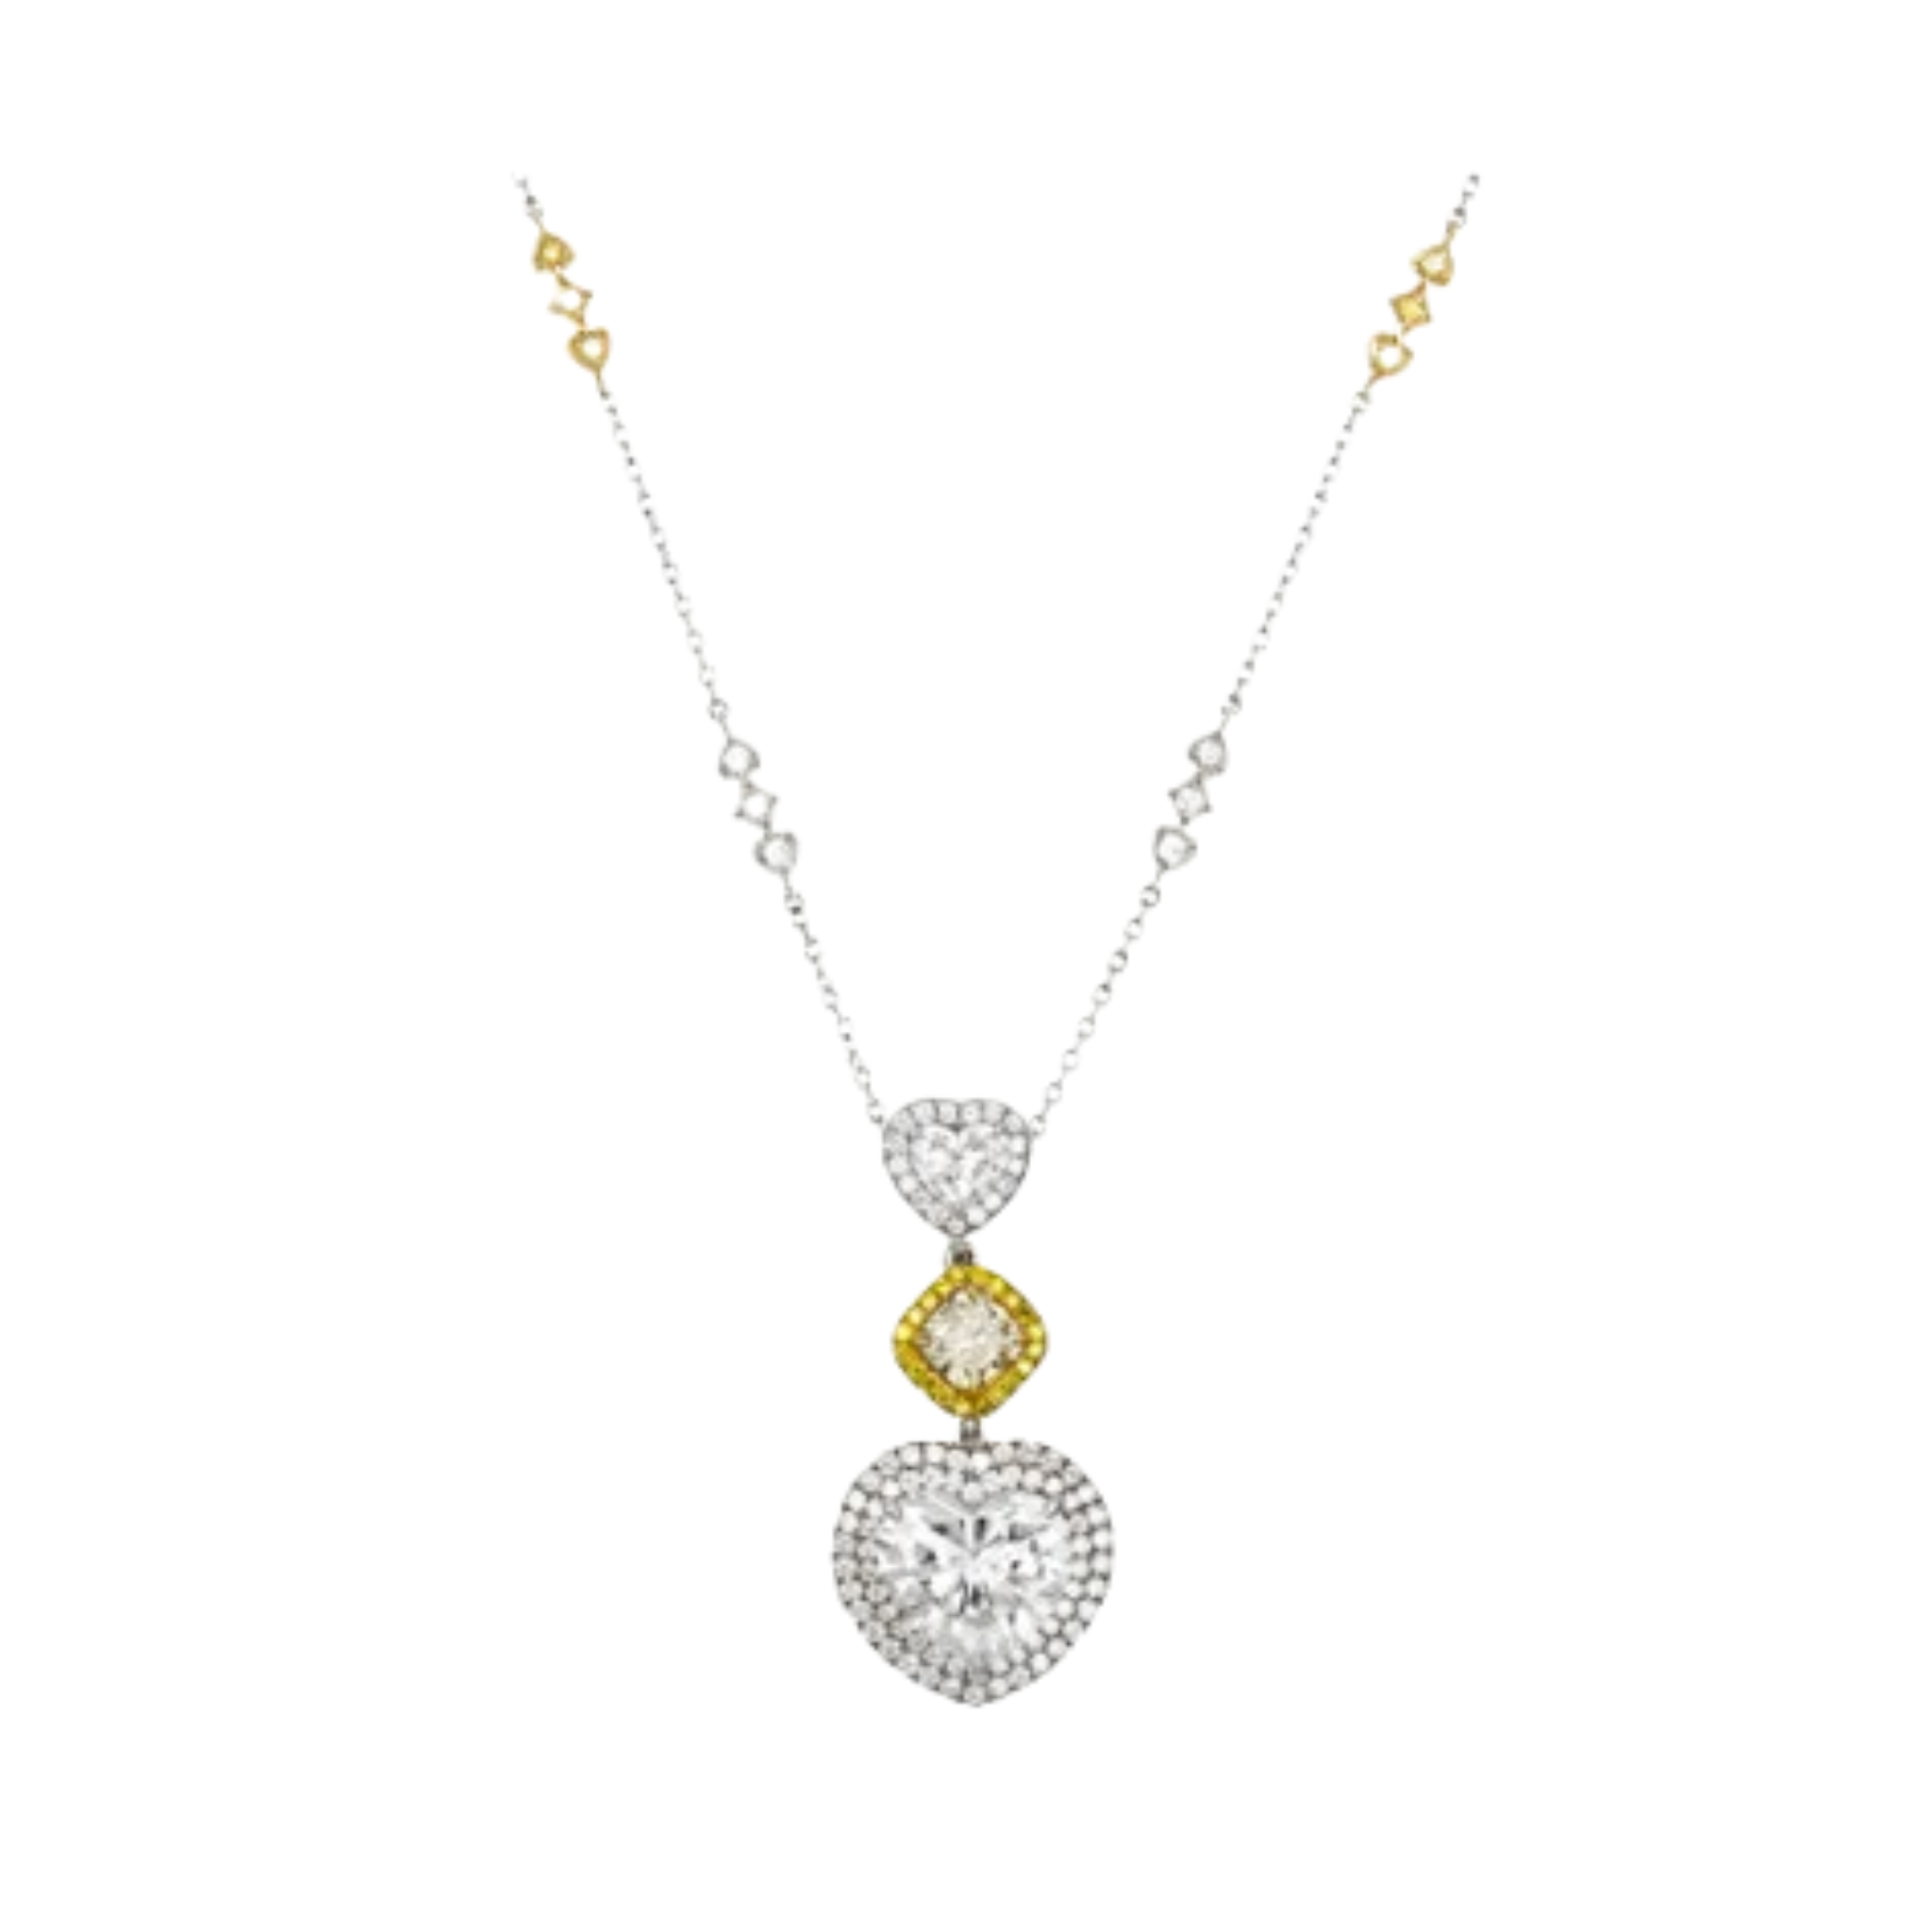 13.91ct  Heart Shaped Diamond By the Yard Necklace.jpg